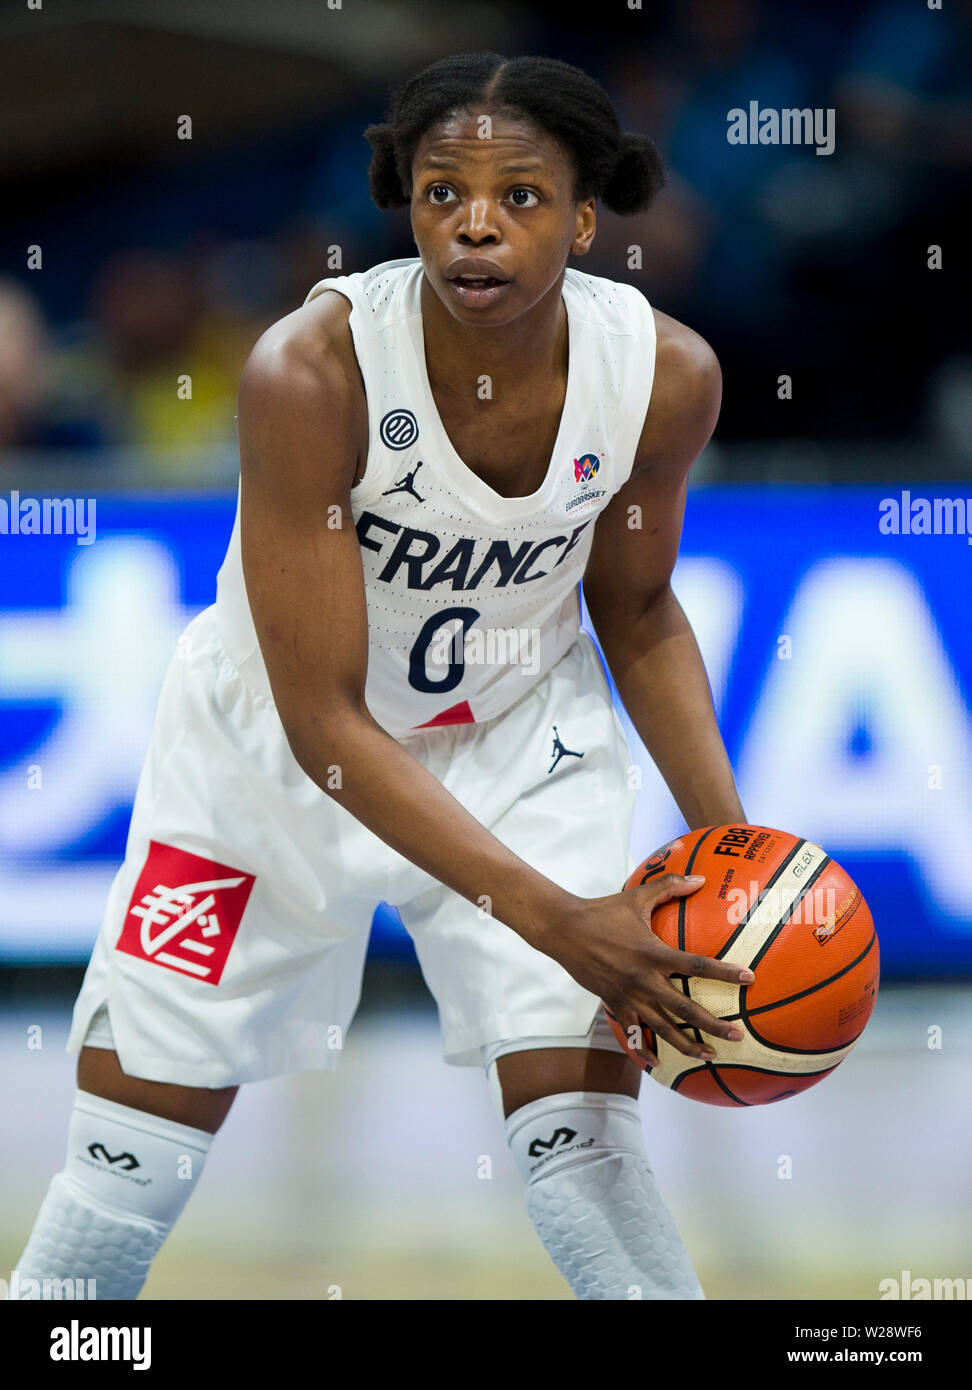 Olivia Epoupa of FRA in action Stock Photo - Alamy